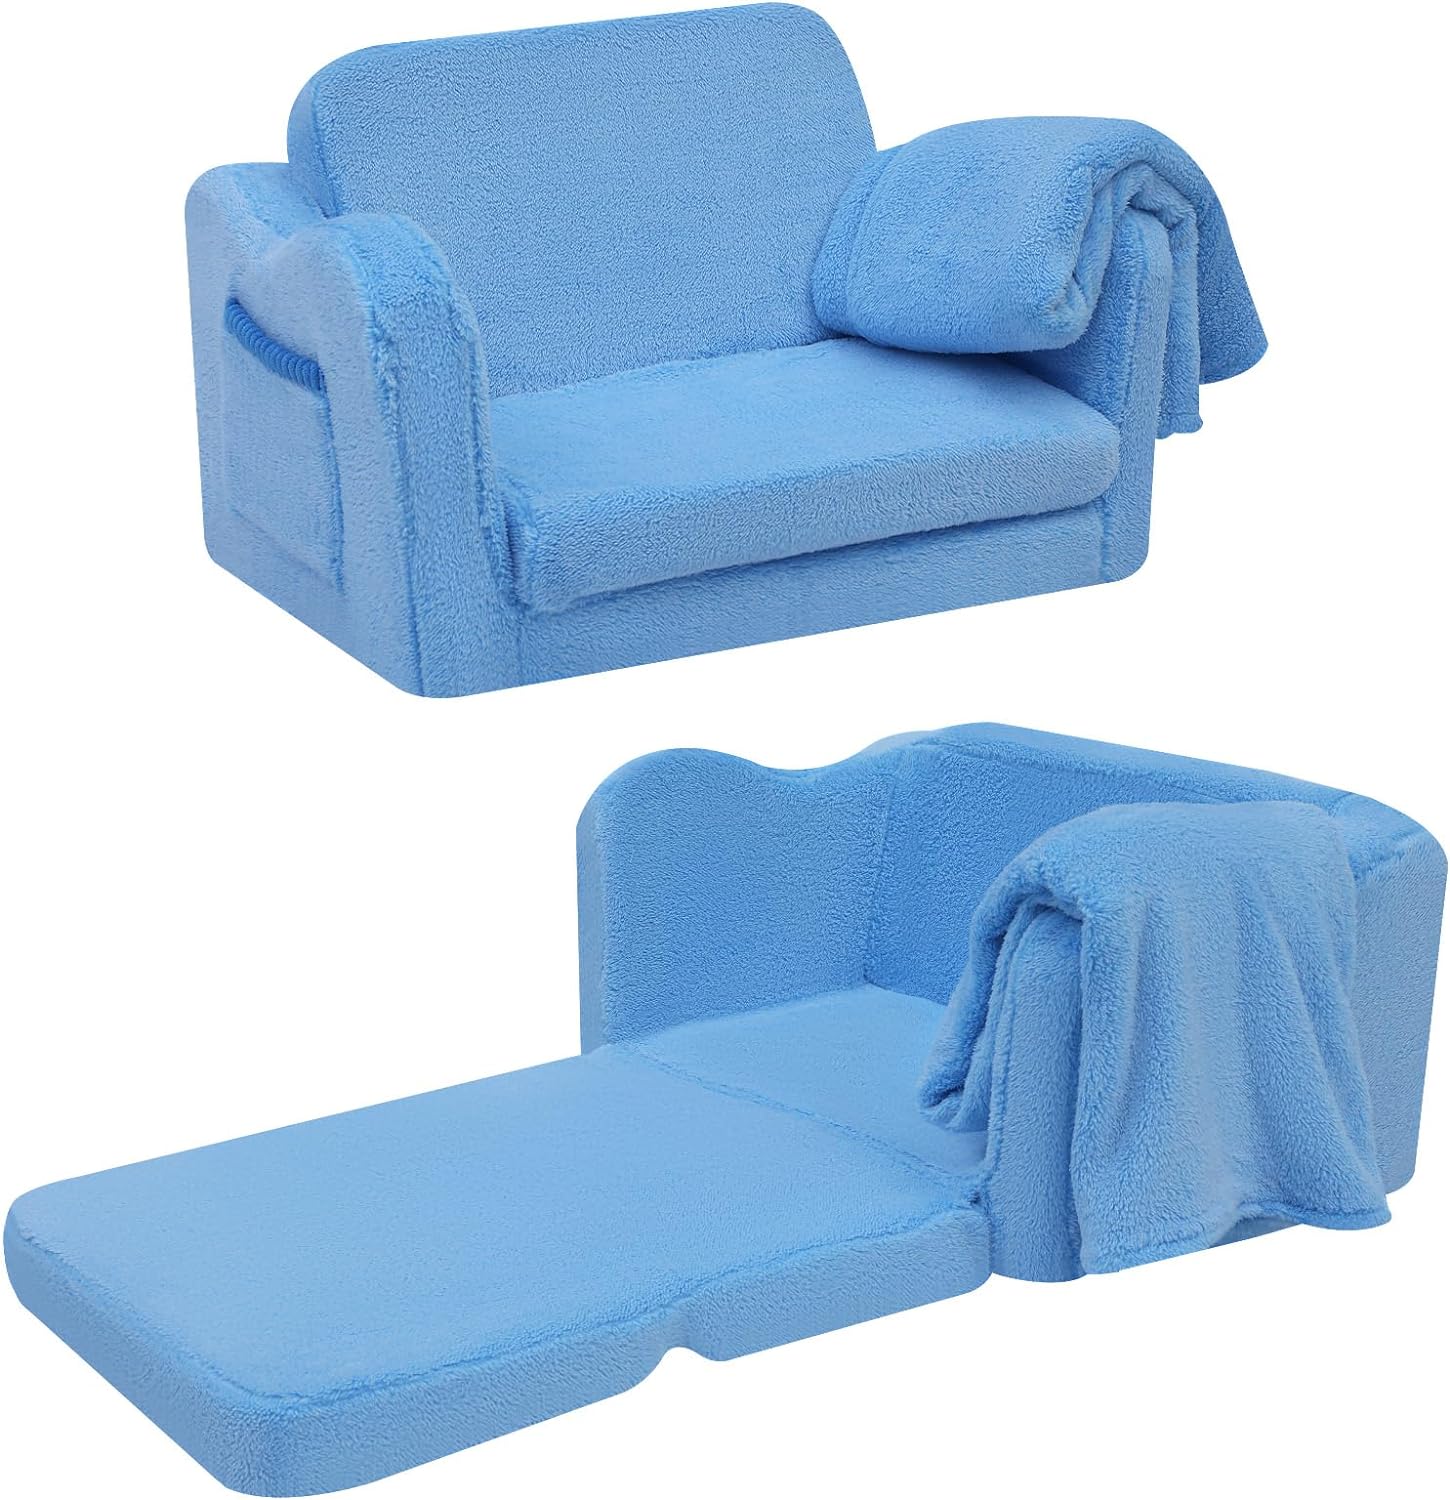 MeMoreCool Toddler Couch Fold Out Kids Couch for Playroom, Flip Out Kids Chair for Toddlers Girls Boys, Fold Up Kids Sofa Convertible Sofa to Folding Lounger, Pull Out Baby Couch Plush Blue